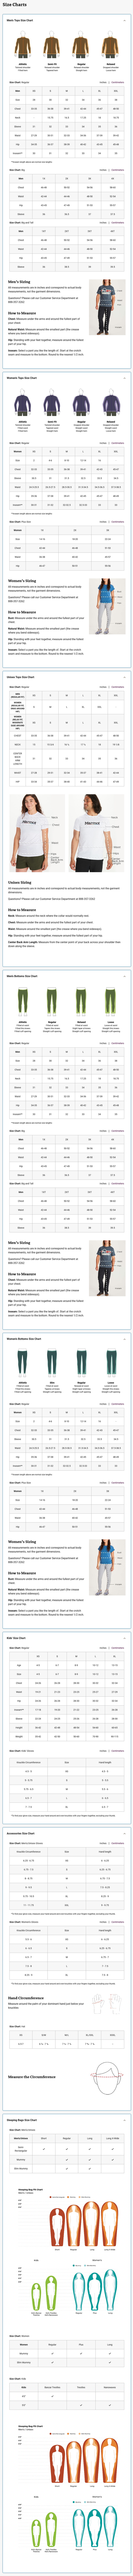 marmot_size_chart_size_guide_fit_guide